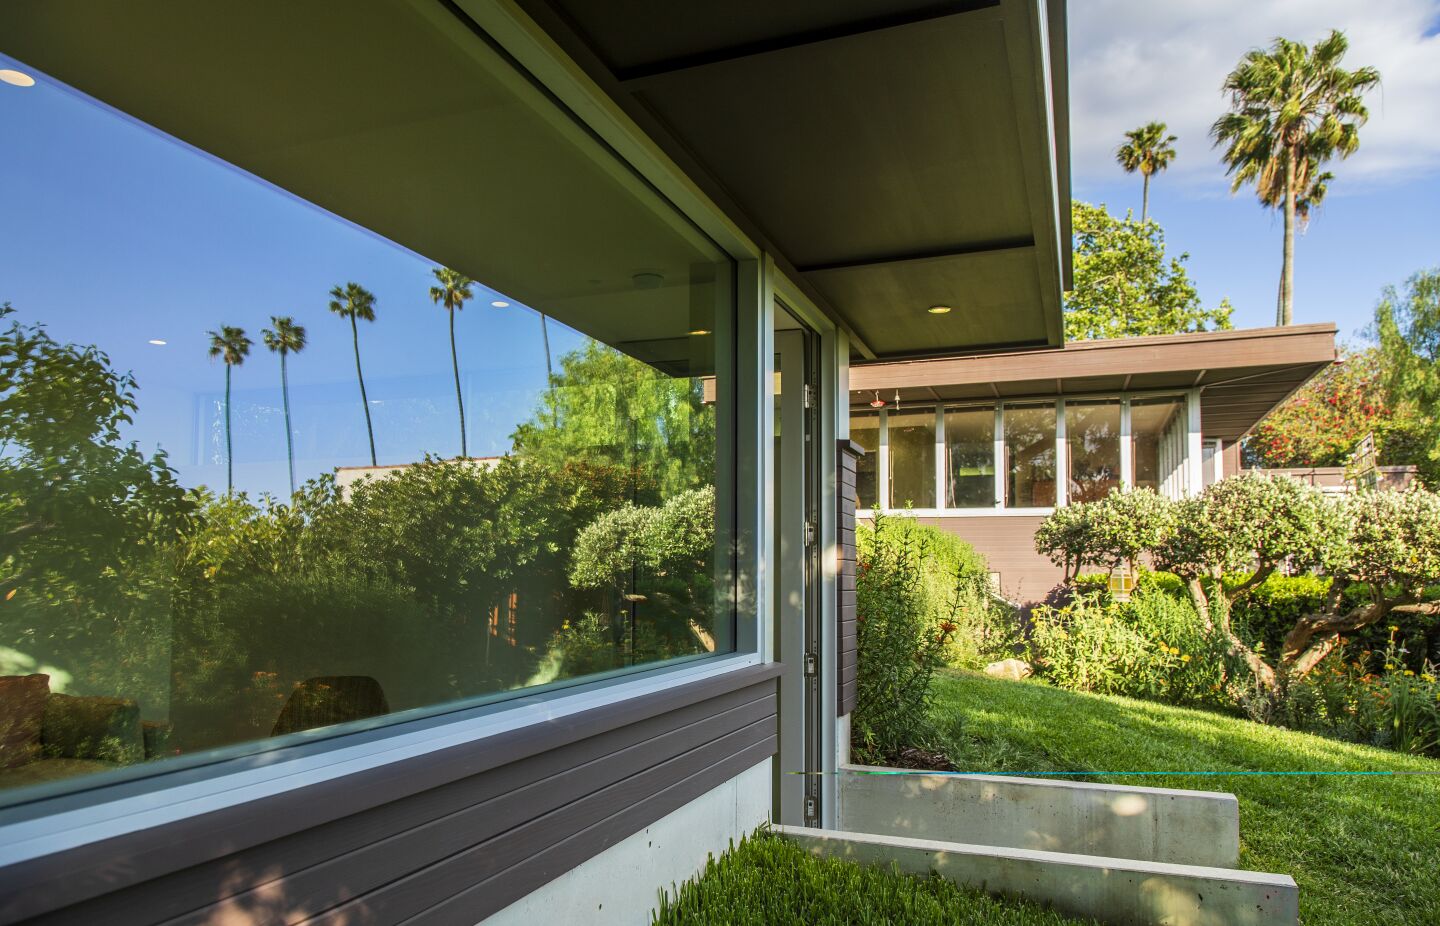 Richard Neutra's McIntosh house as seen from the recreation room.